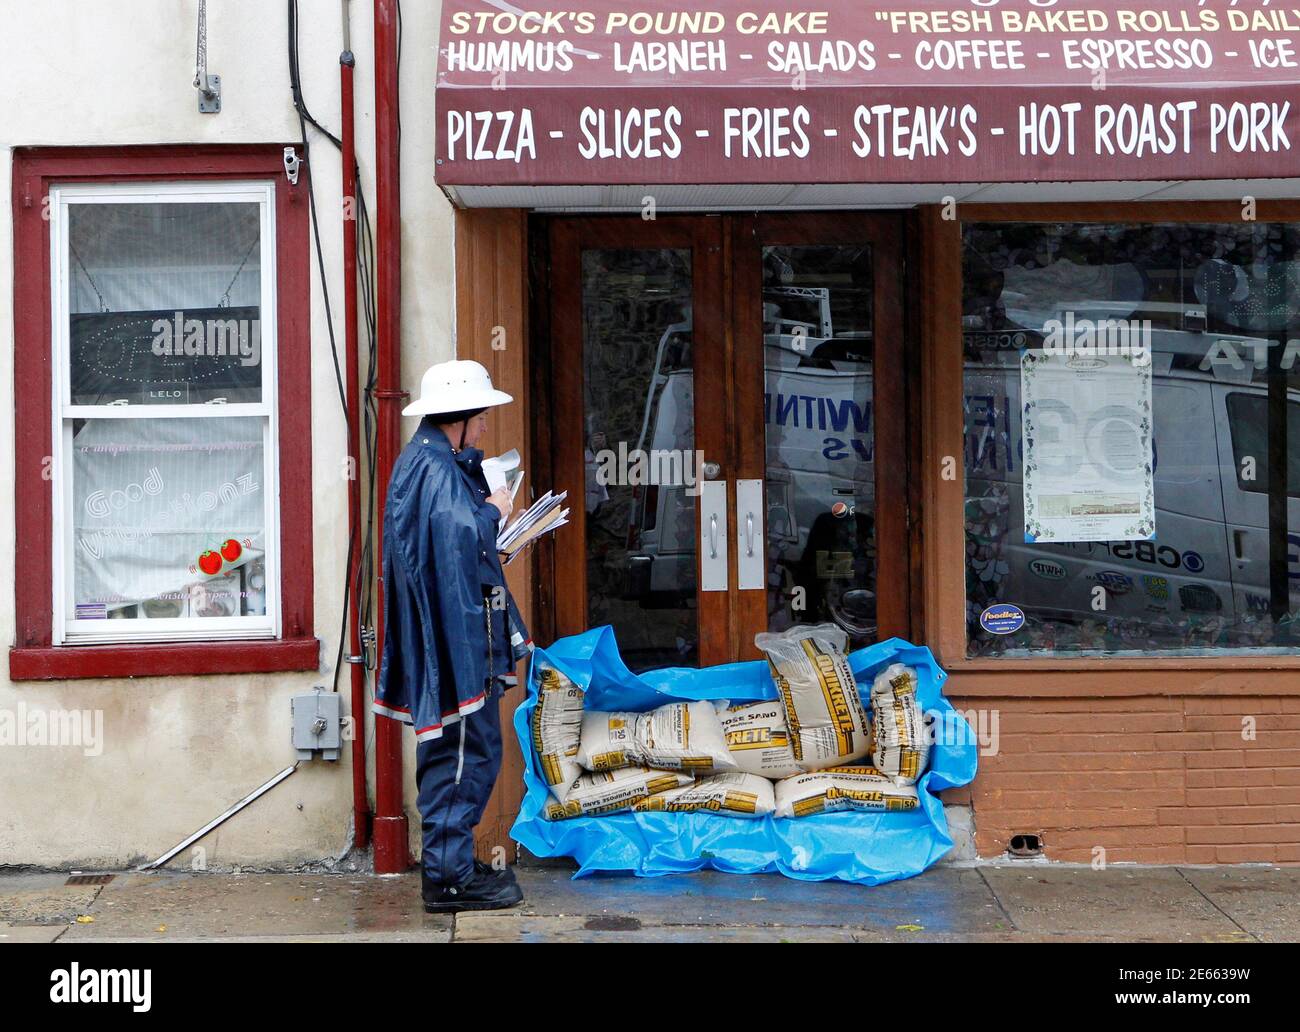 A postal worker walks past a sandbagged restaurant as he delivers mail in wind and rain from Hurricane Sandy on Main street in the Manayunk section of Philadelphia, Pennsylvania, October 29, 2012. Hurricane Sandy, the monster storm bearing down on the U.S. East Coast, strengthened on Monday after hundreds of thousands moved to higher ground, public transport shut down and the U.S. stock market suffered its first weather-related closure in 27 years.  REUTERS/Tim Shaffer (UNITED STATES - Tags: ENVIRONMENT) Stock Photo